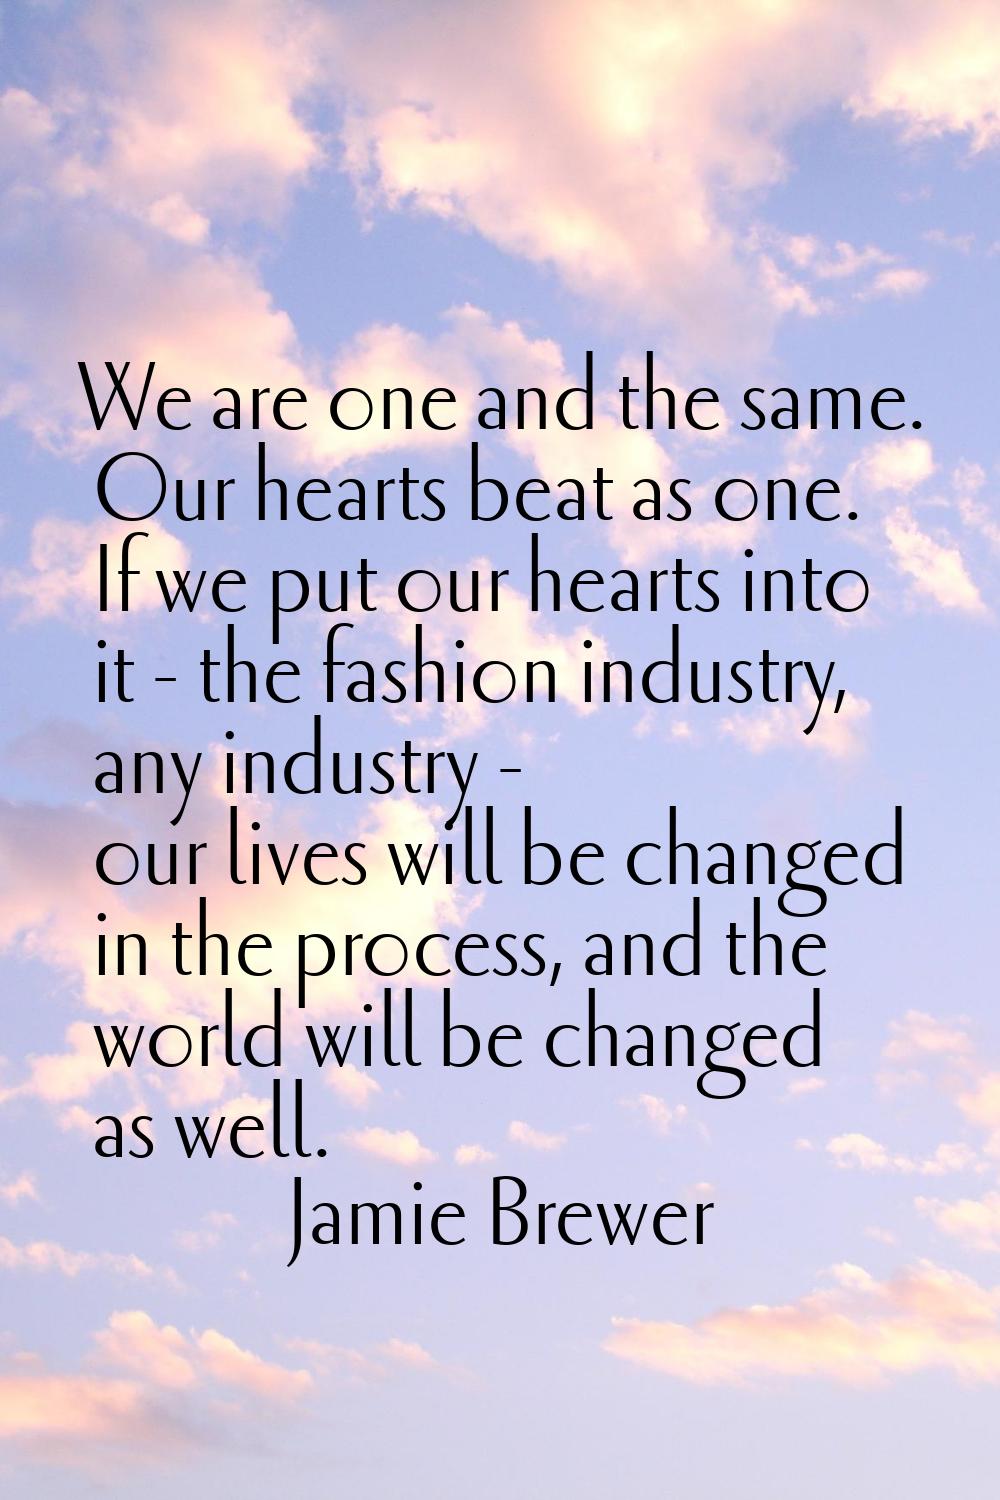 We are one and the same. Our hearts beat as one. If we put our hearts into it - the fashion industr